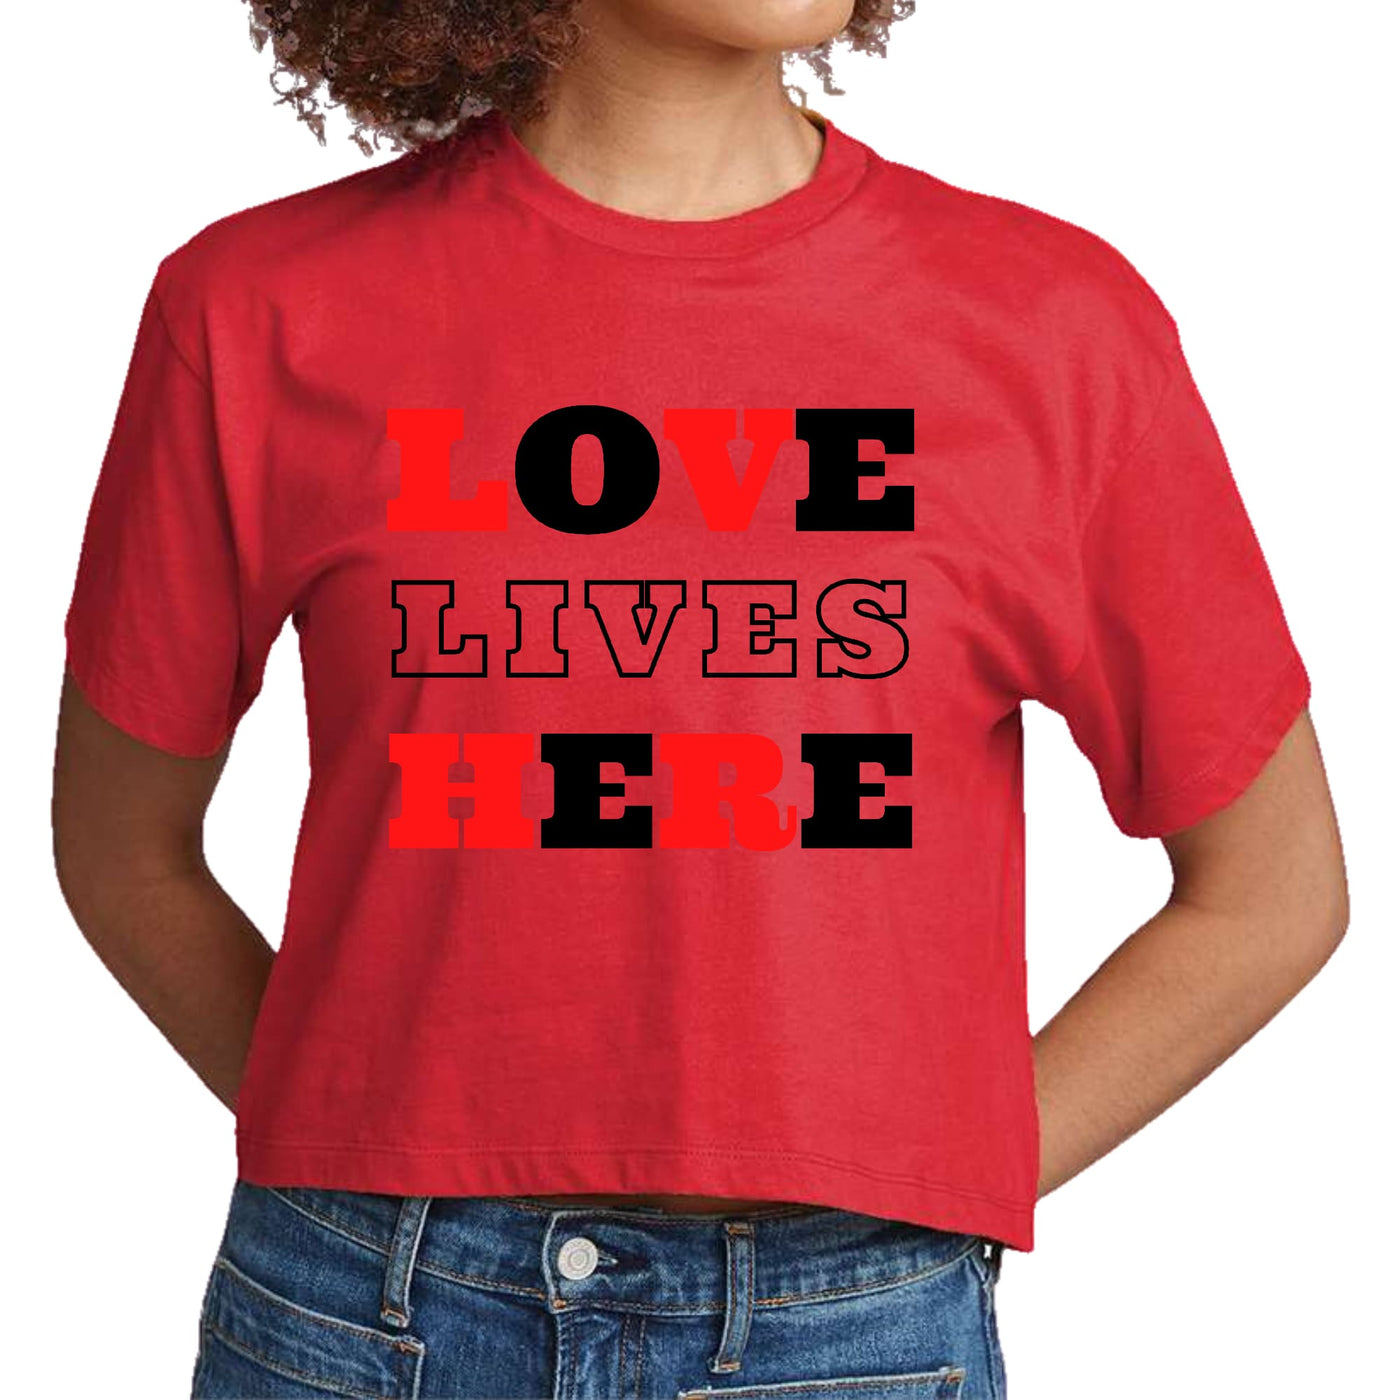 Womens Cropped Graphic T-shirt Love Lives Here Christian Red Black - Womens